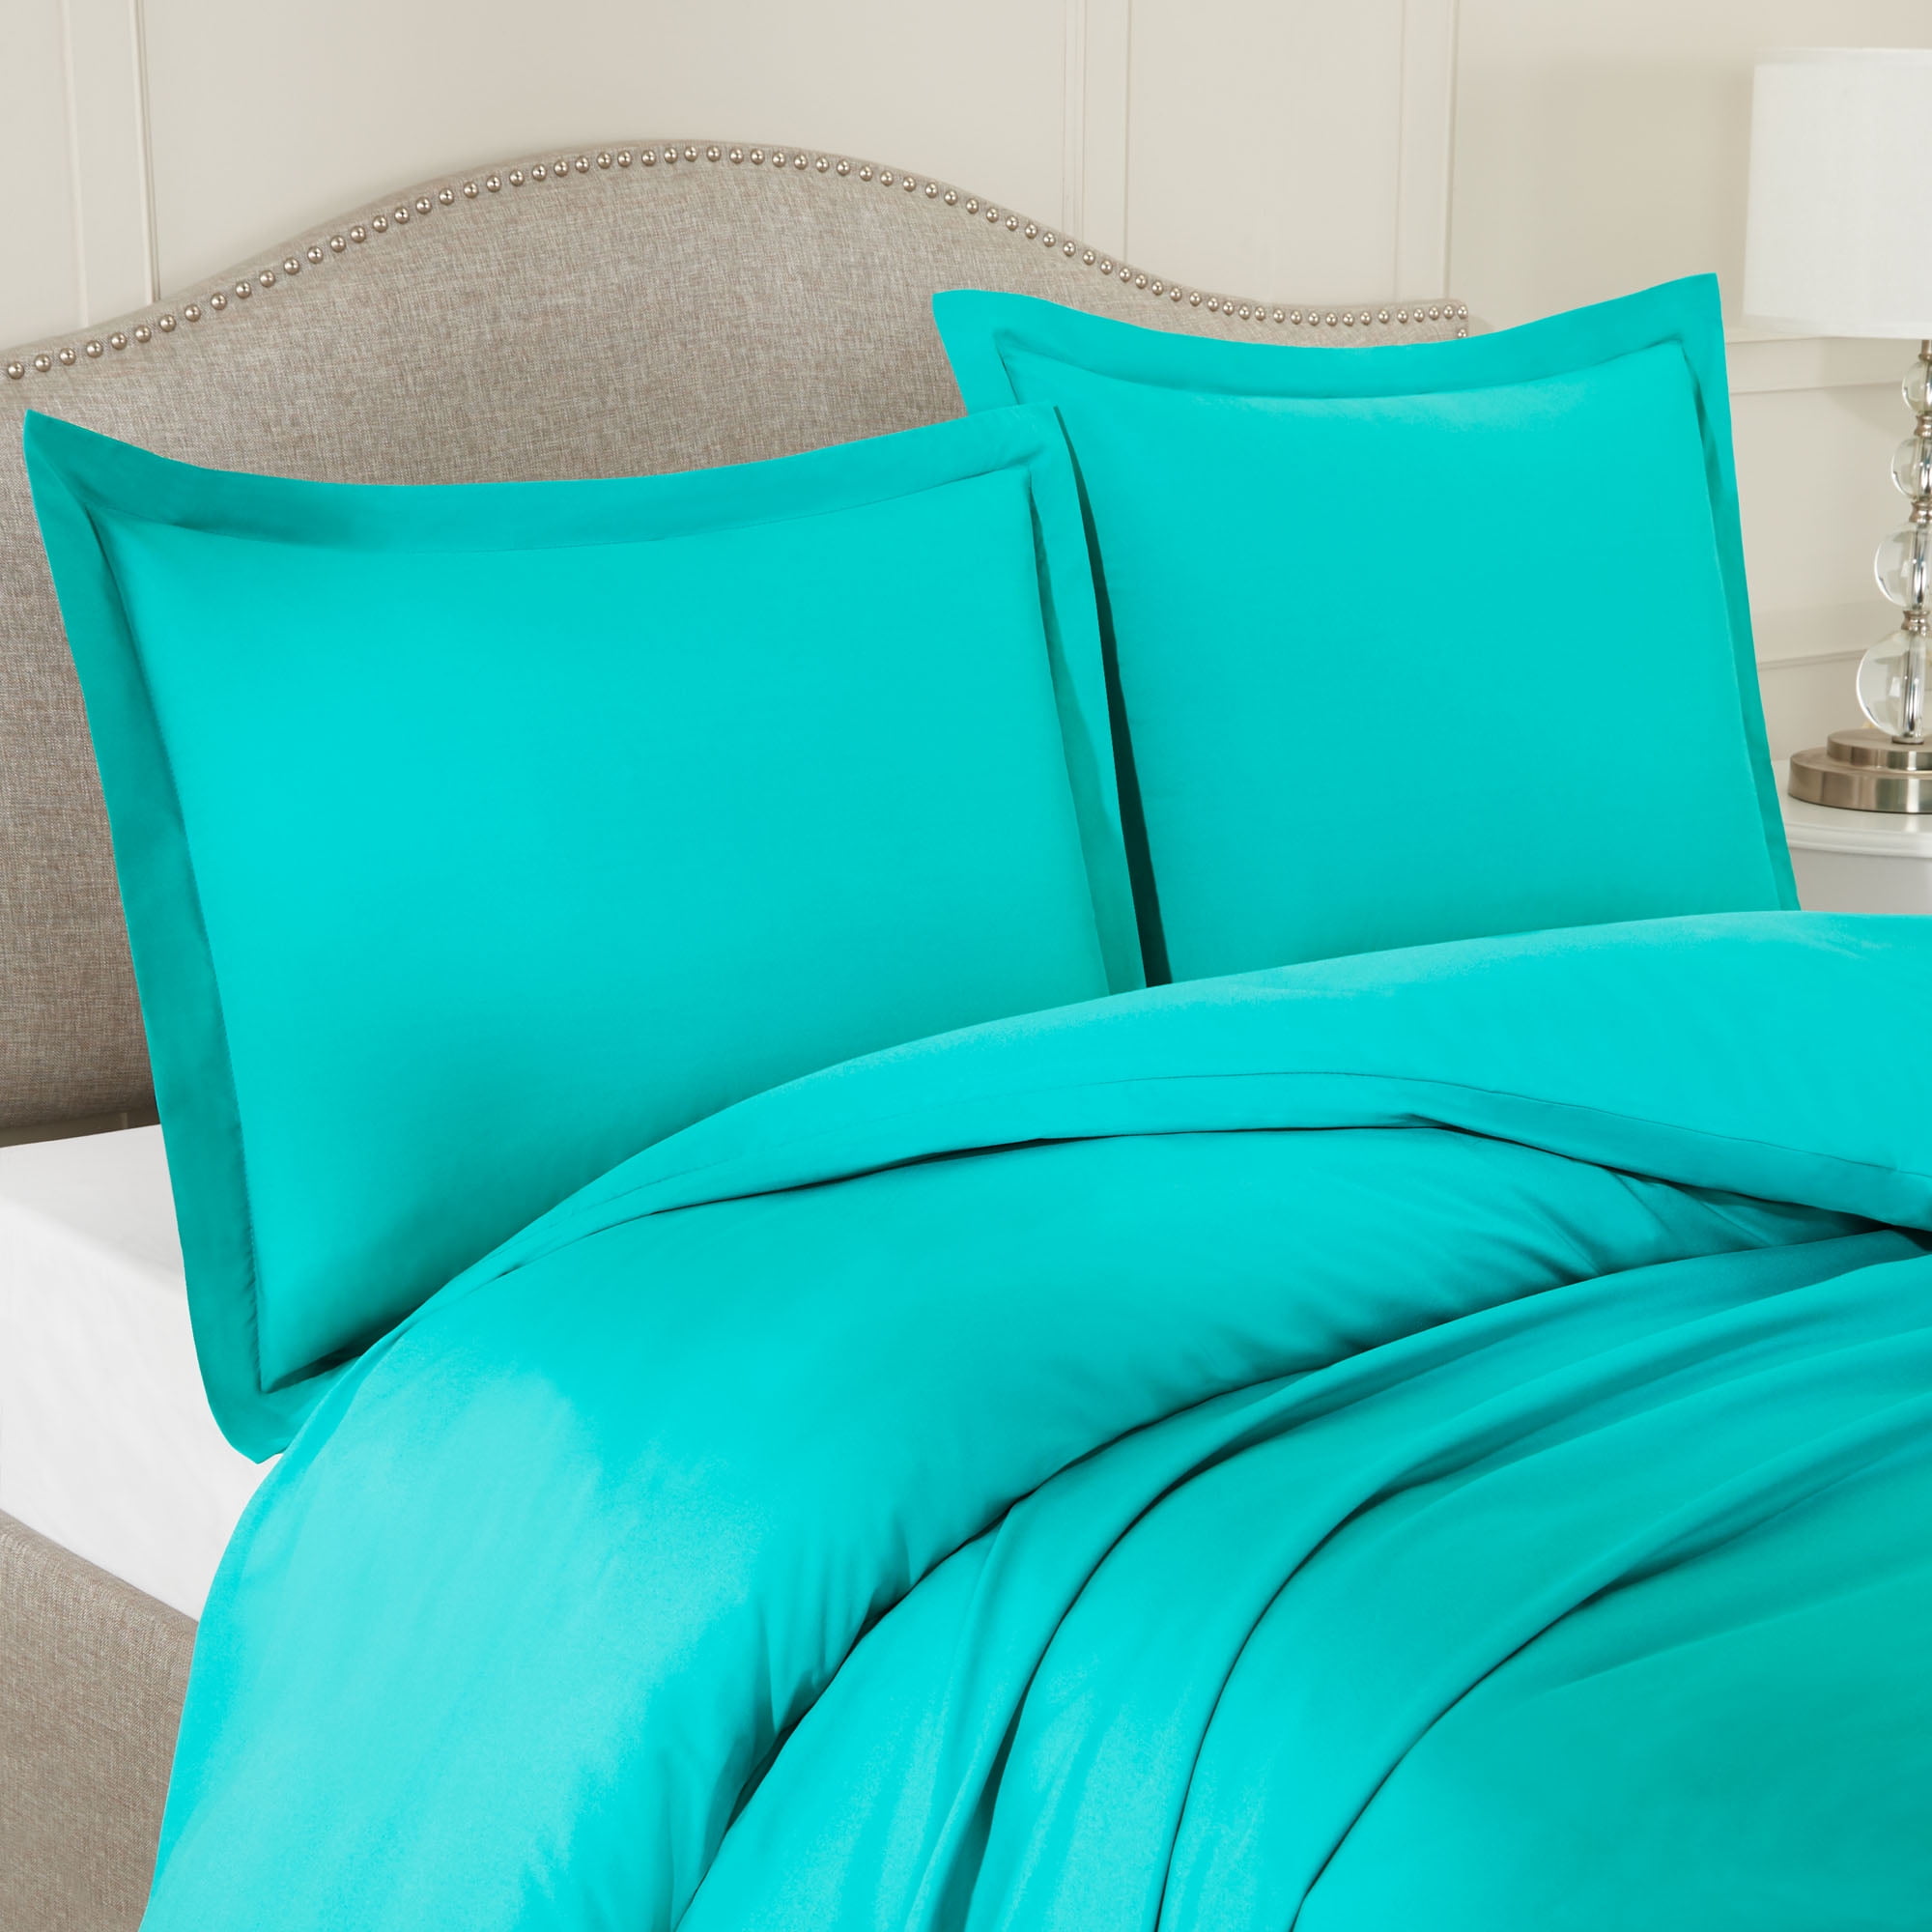 Pillow Shams Teal On Closure, Teal Brushed Cotton Duvet Cover Set Double